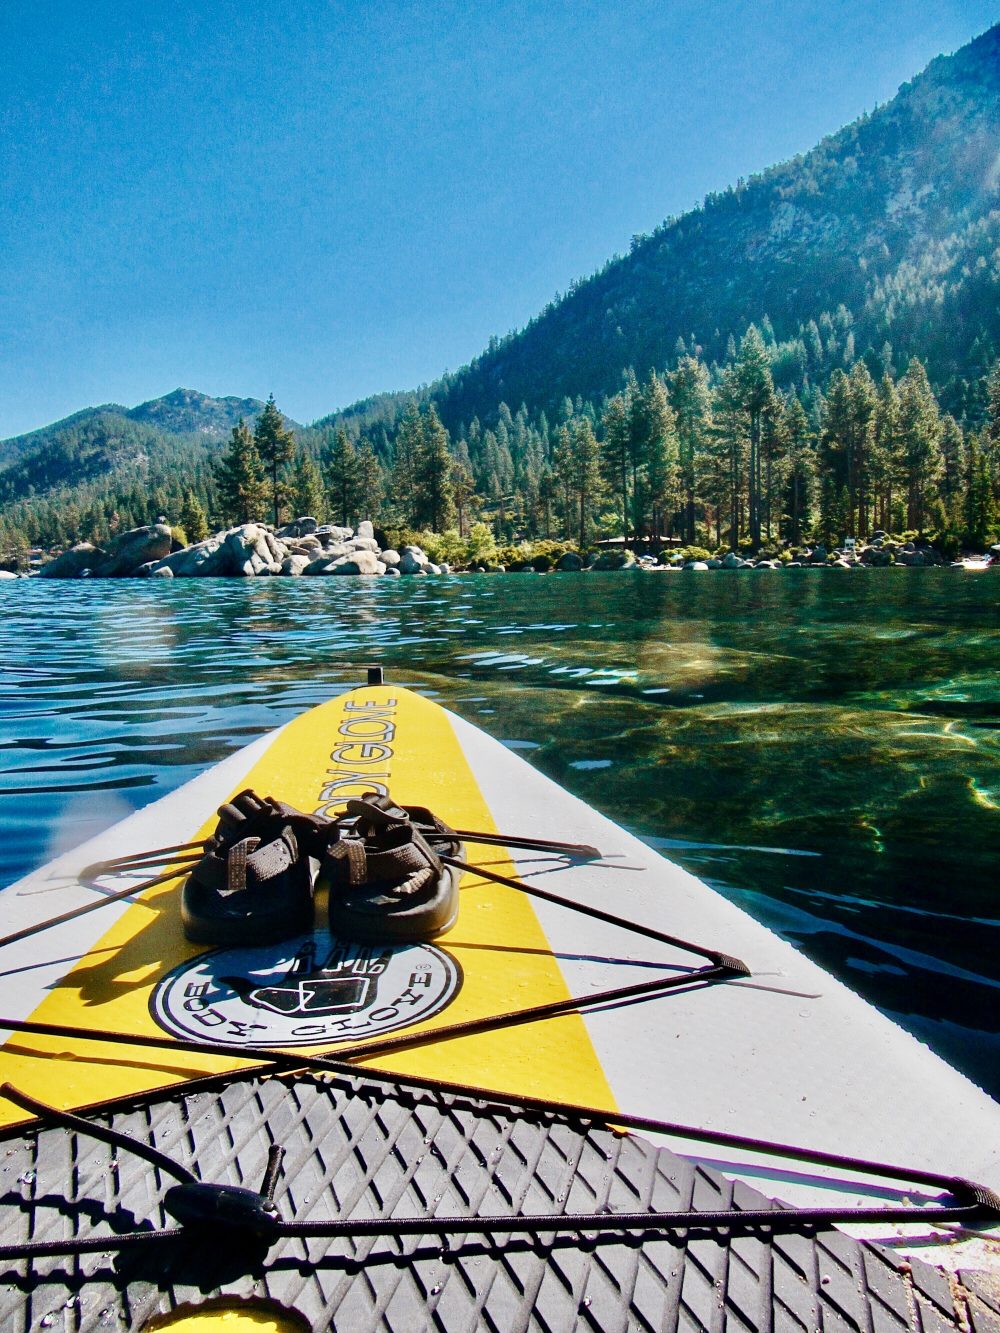 Best Place to Visit in September: Lake Tahoe